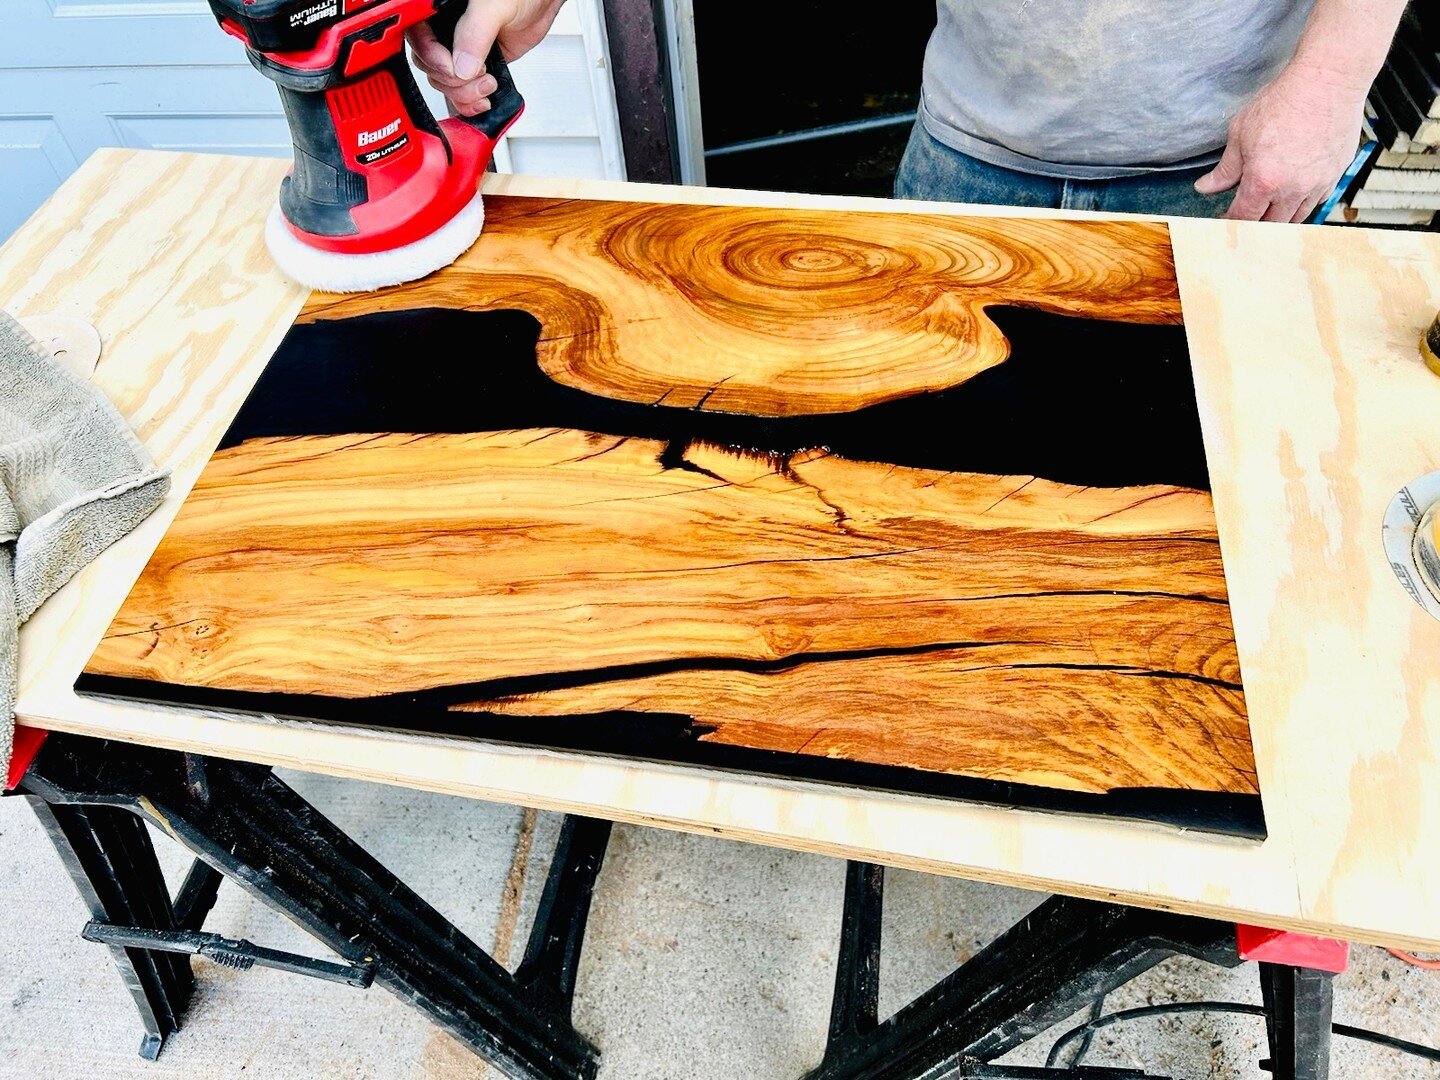 We are always amazed by the incredible talent in our community and would love to see what you&rsquo;ve been crafting with your hands! 

📸 Post a photo of your latest woodworking project in the comments below and share the inspiration behind your cre